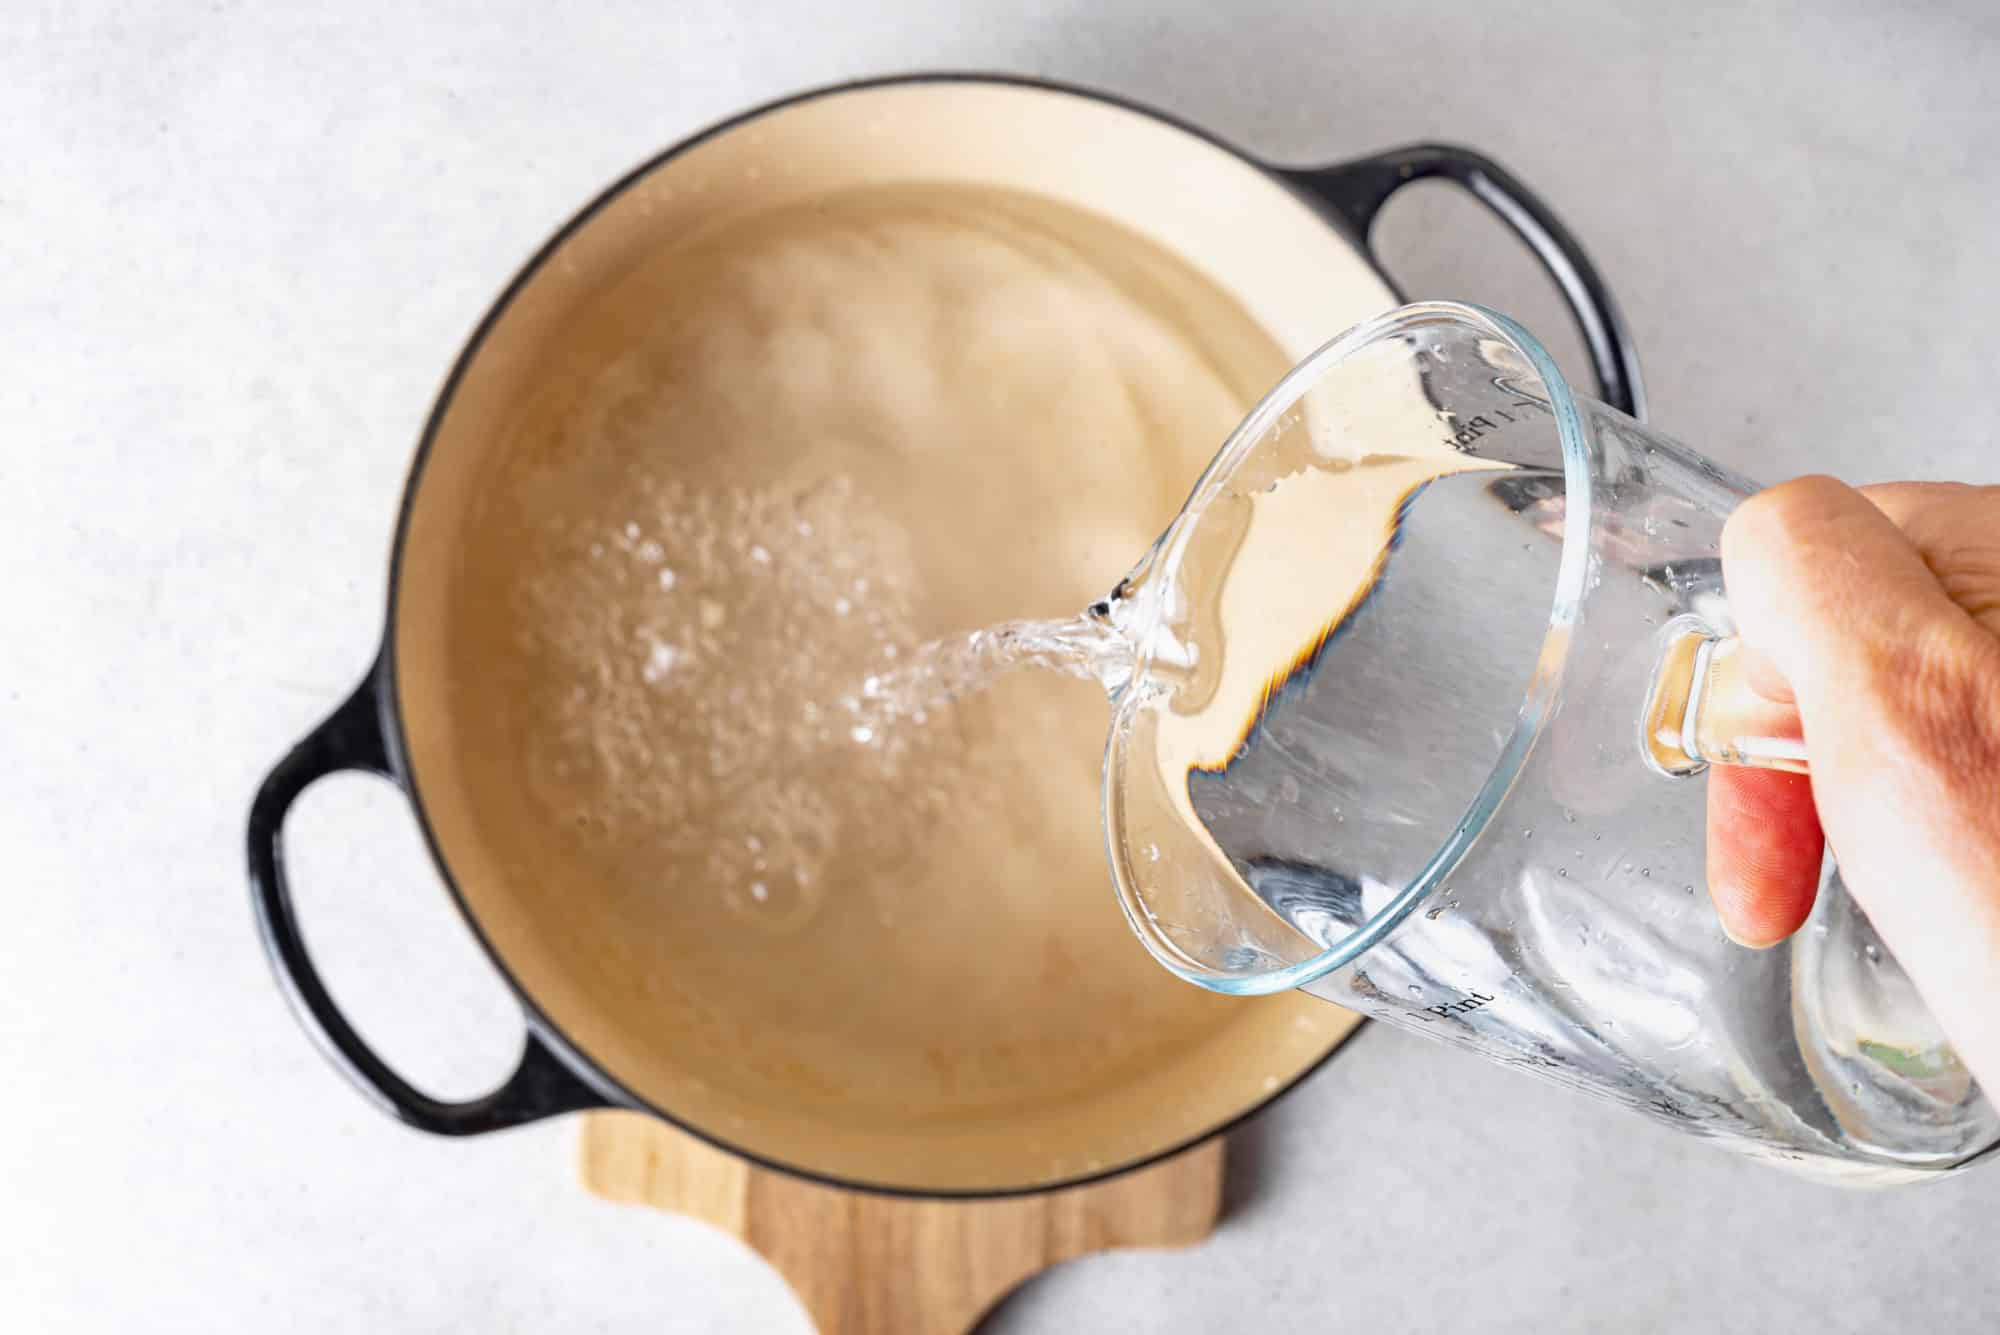 water-being-added-to-a-soup-pot-from-a-glass-pitcher-on-a-wooden-board